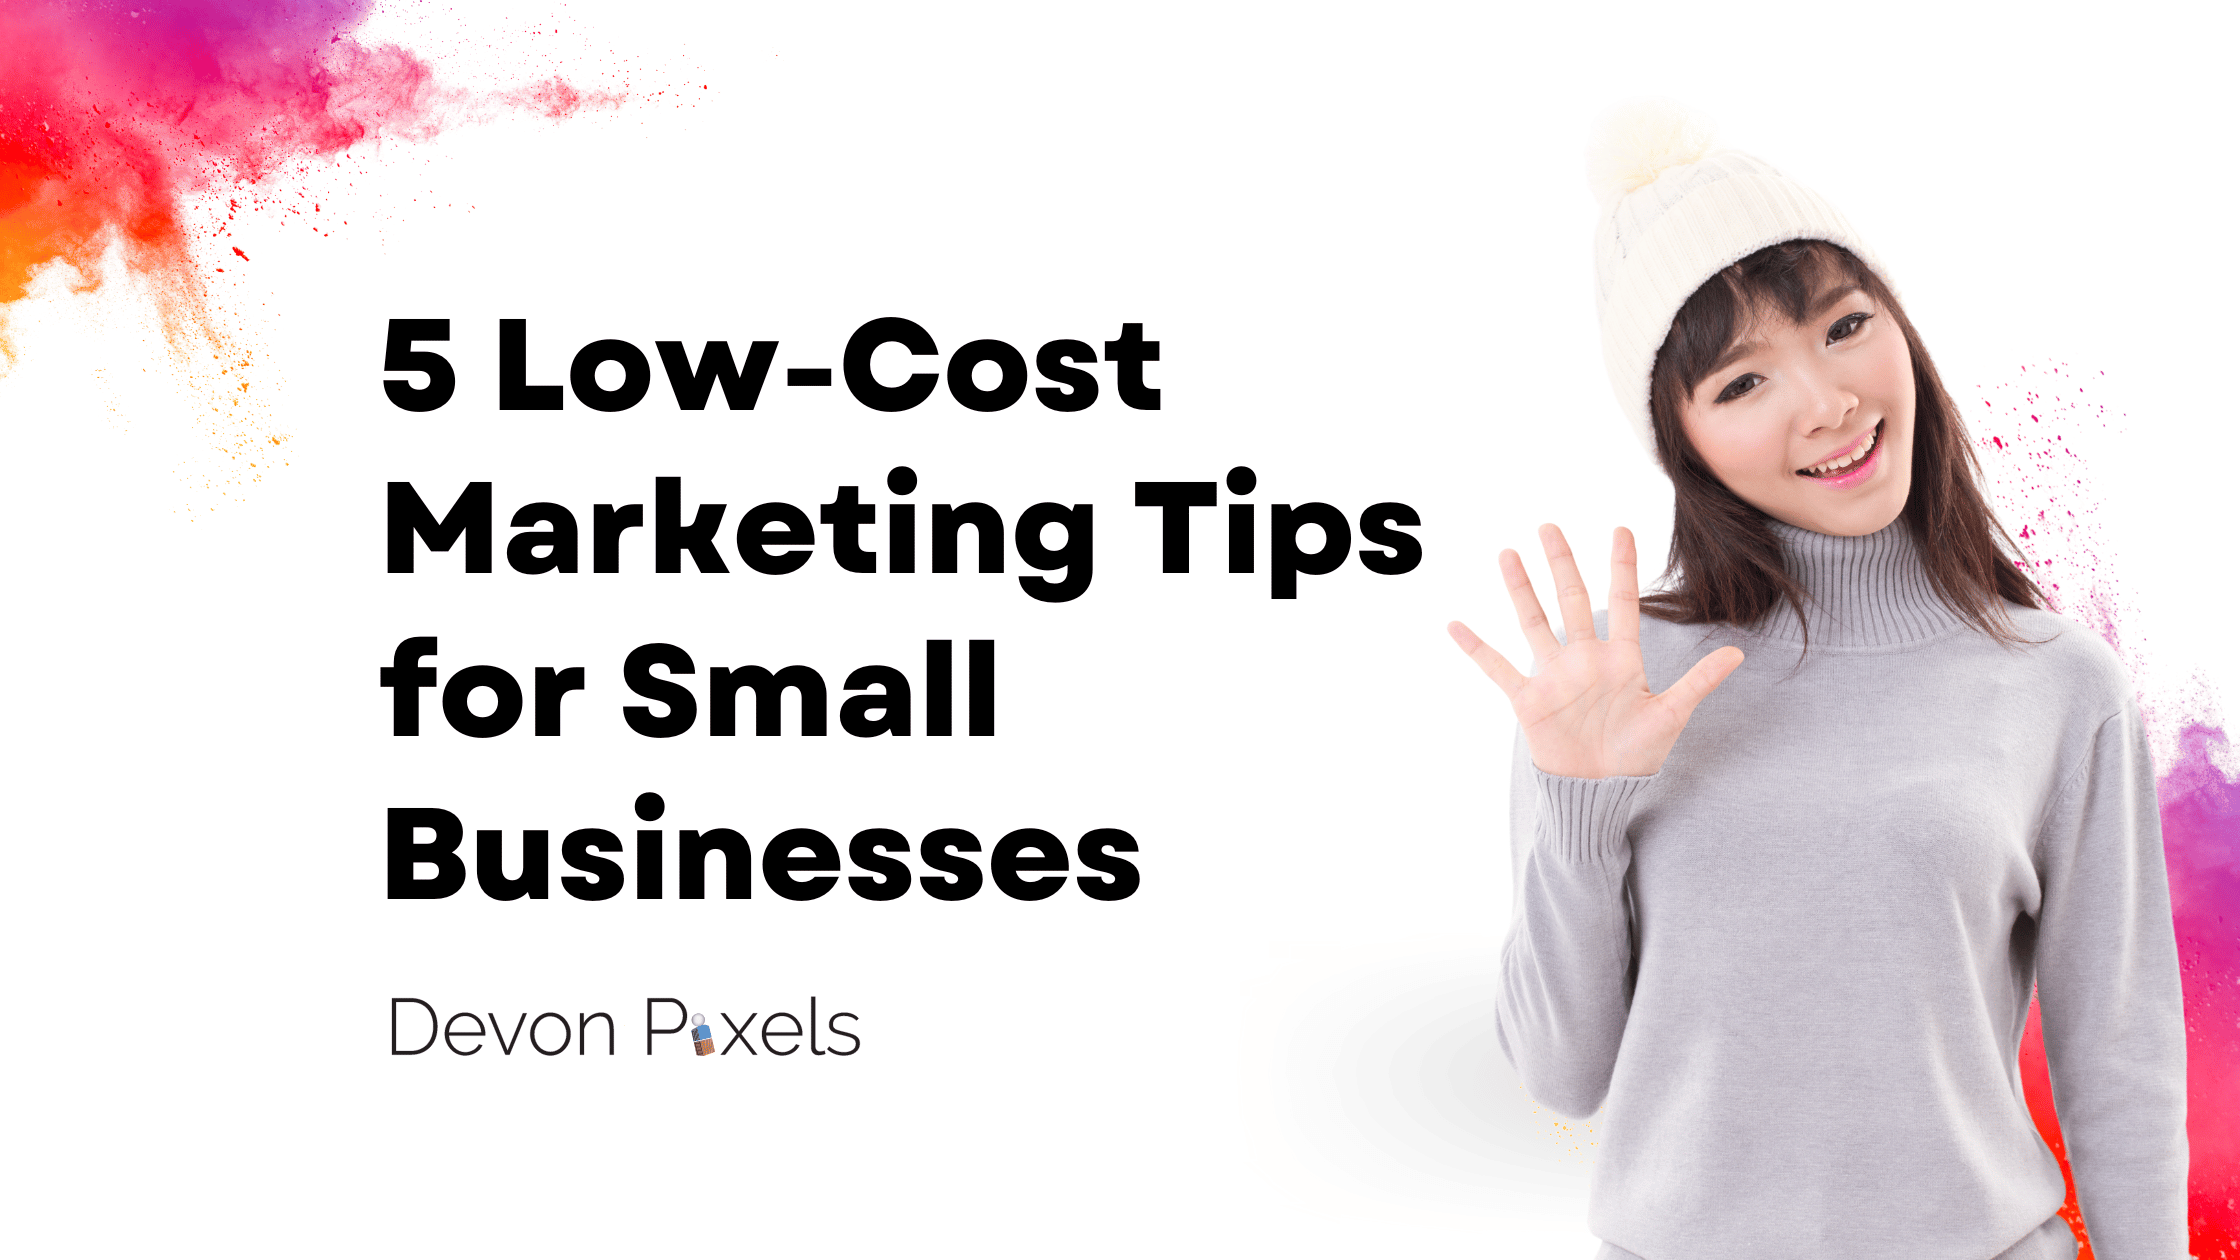 5 Low-Cost Marketing Tips for Small Businesses